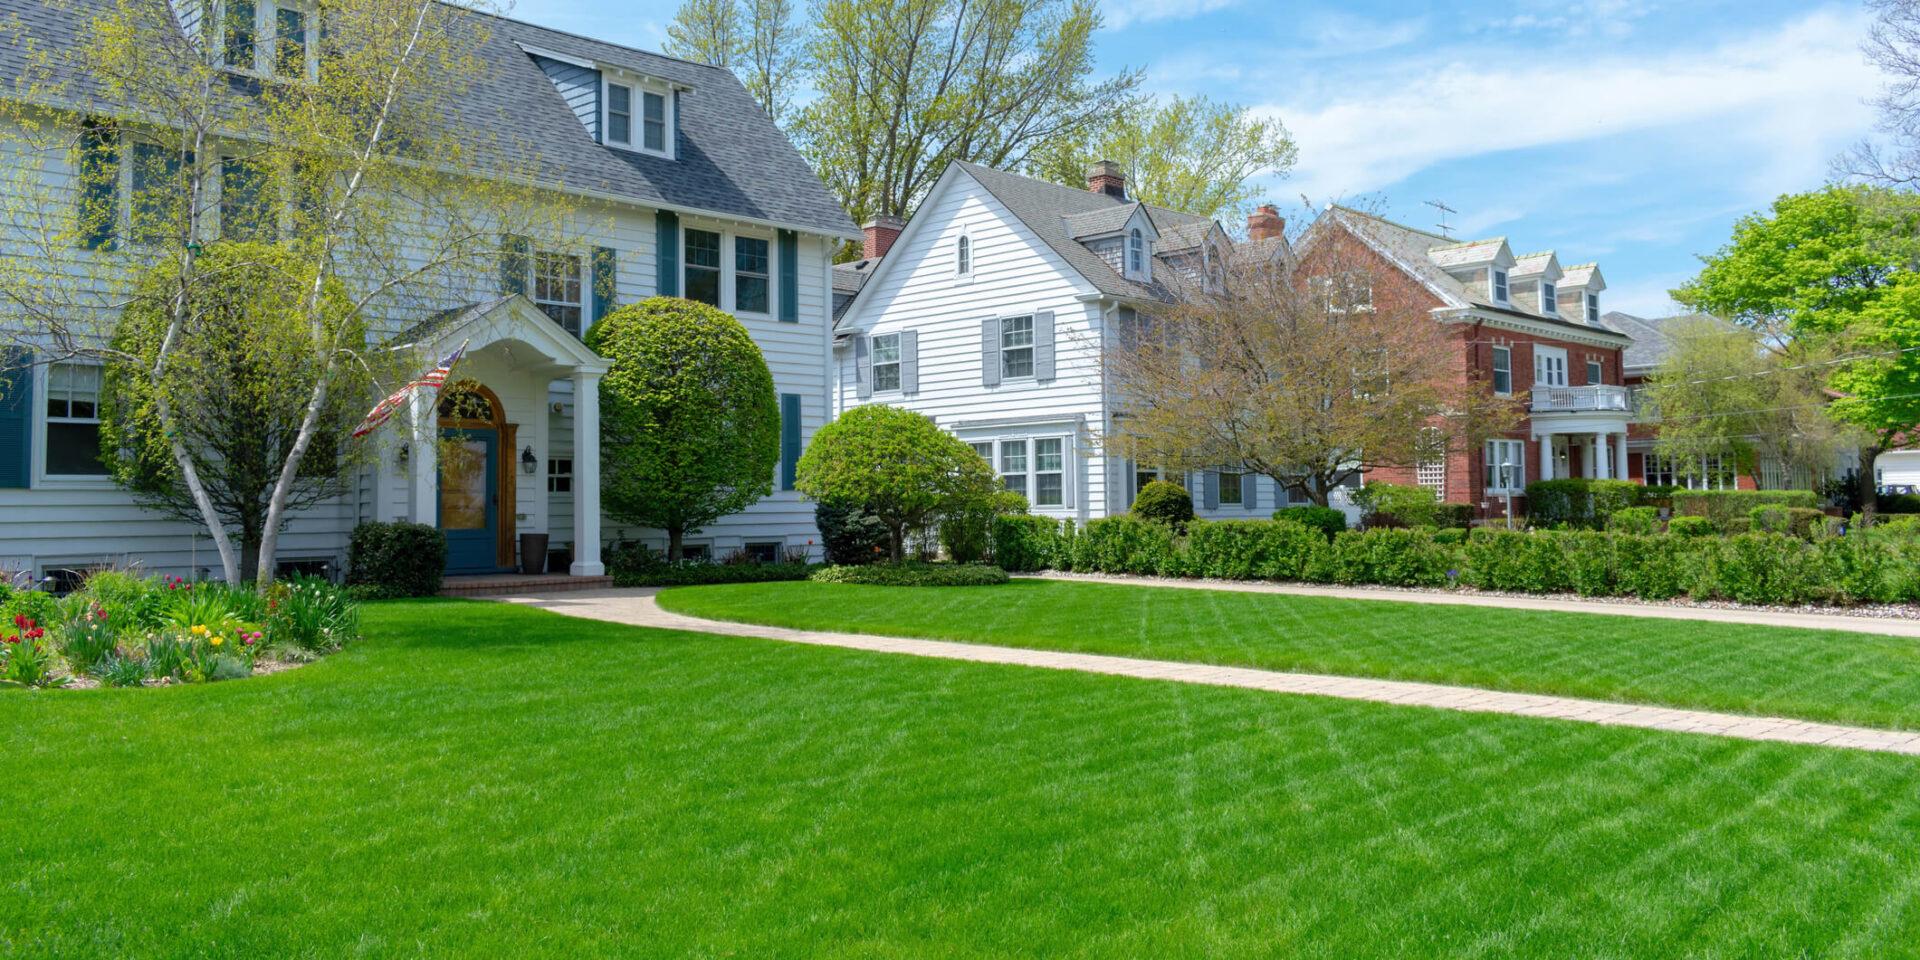 Professional lawn mowing service in Raleigh NC keeps lawns lush and well-manicured.